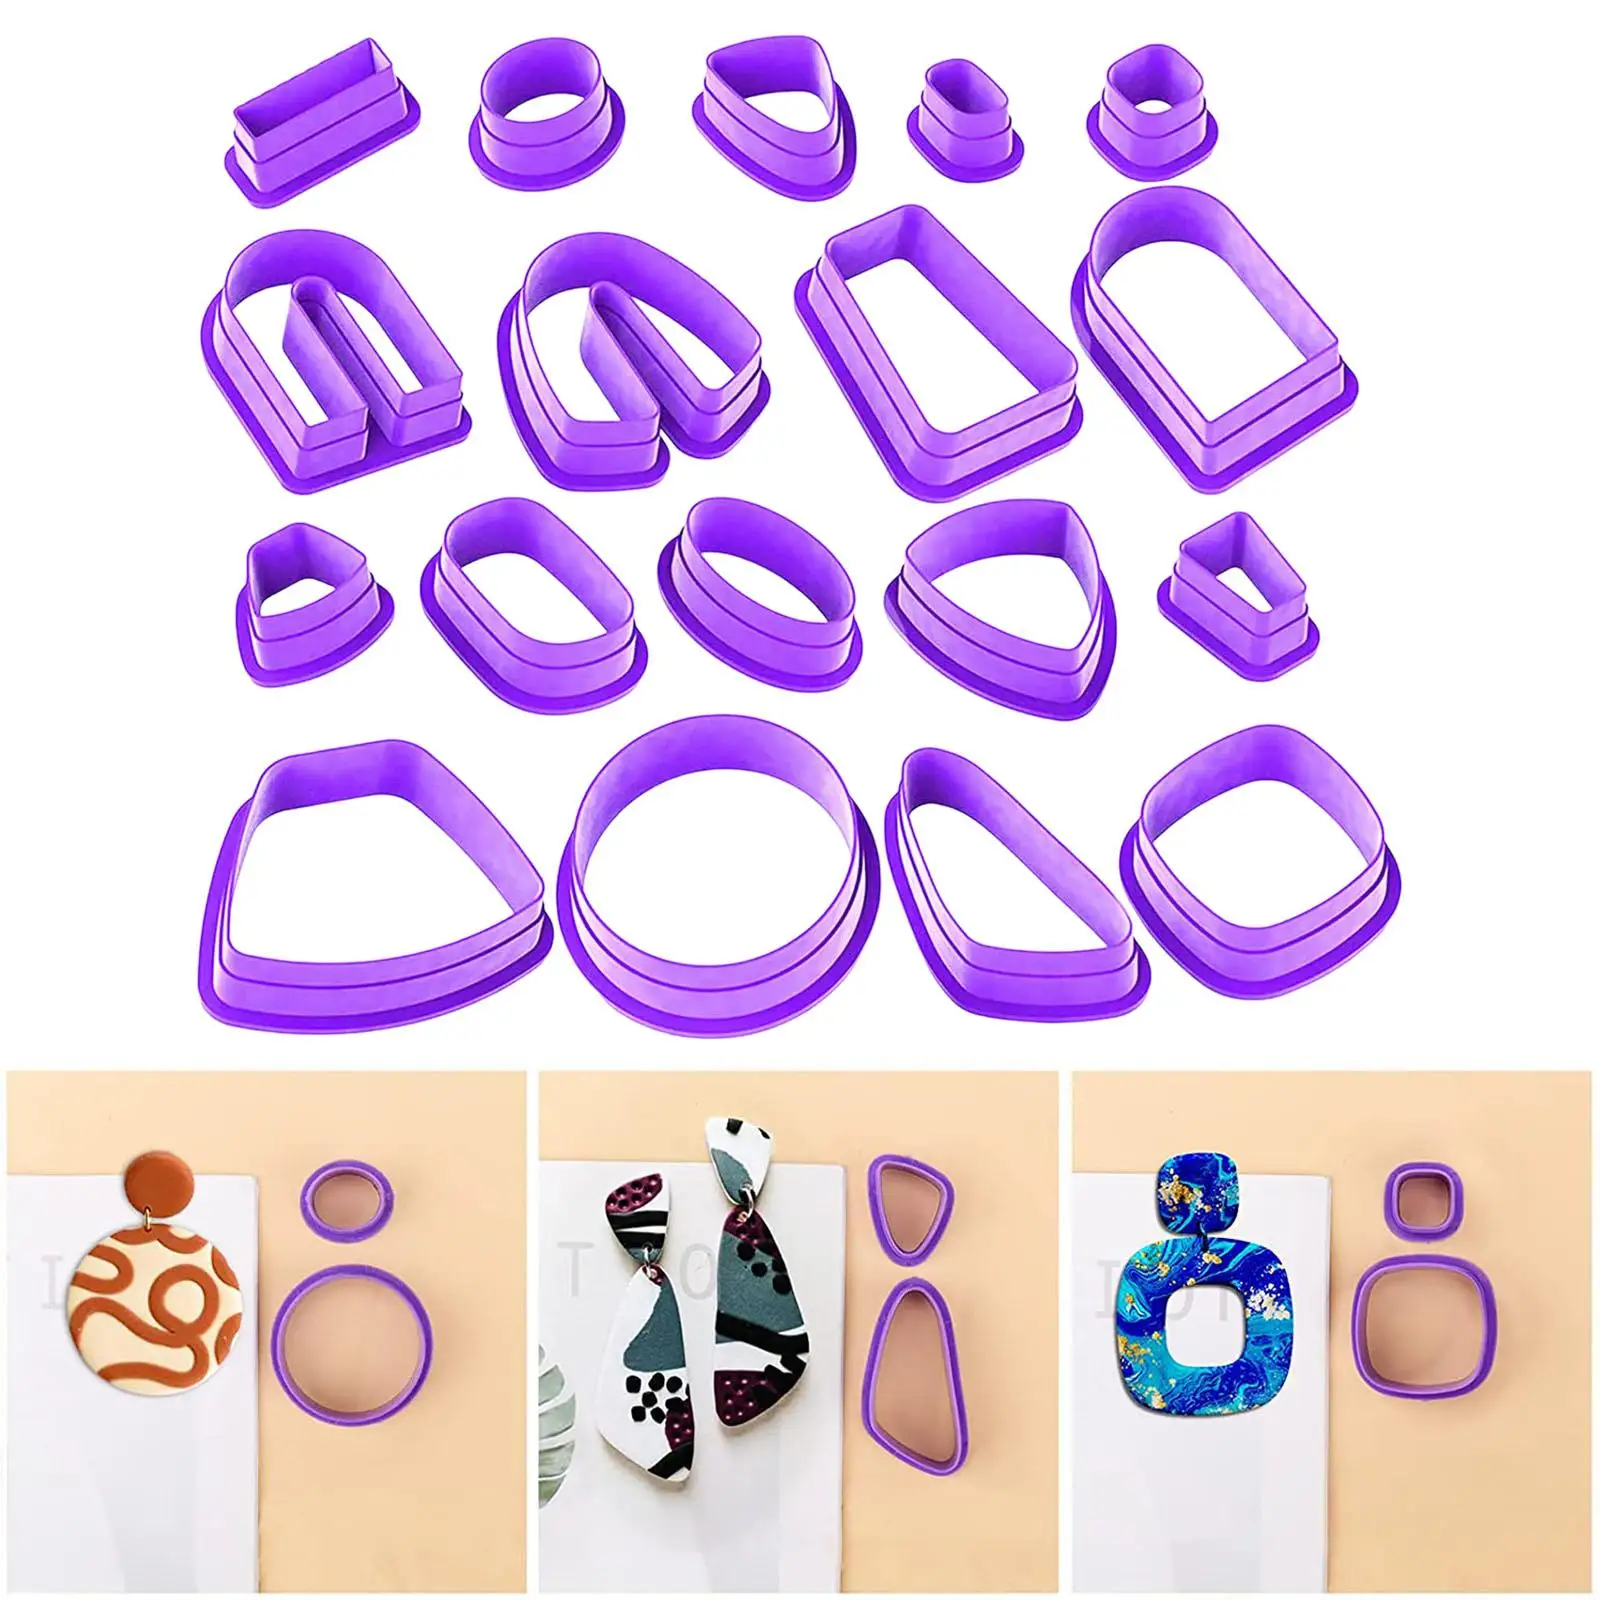 18 Pieces Plastic Polymer Clay Cutters Earring Making Kit Shapes Kids